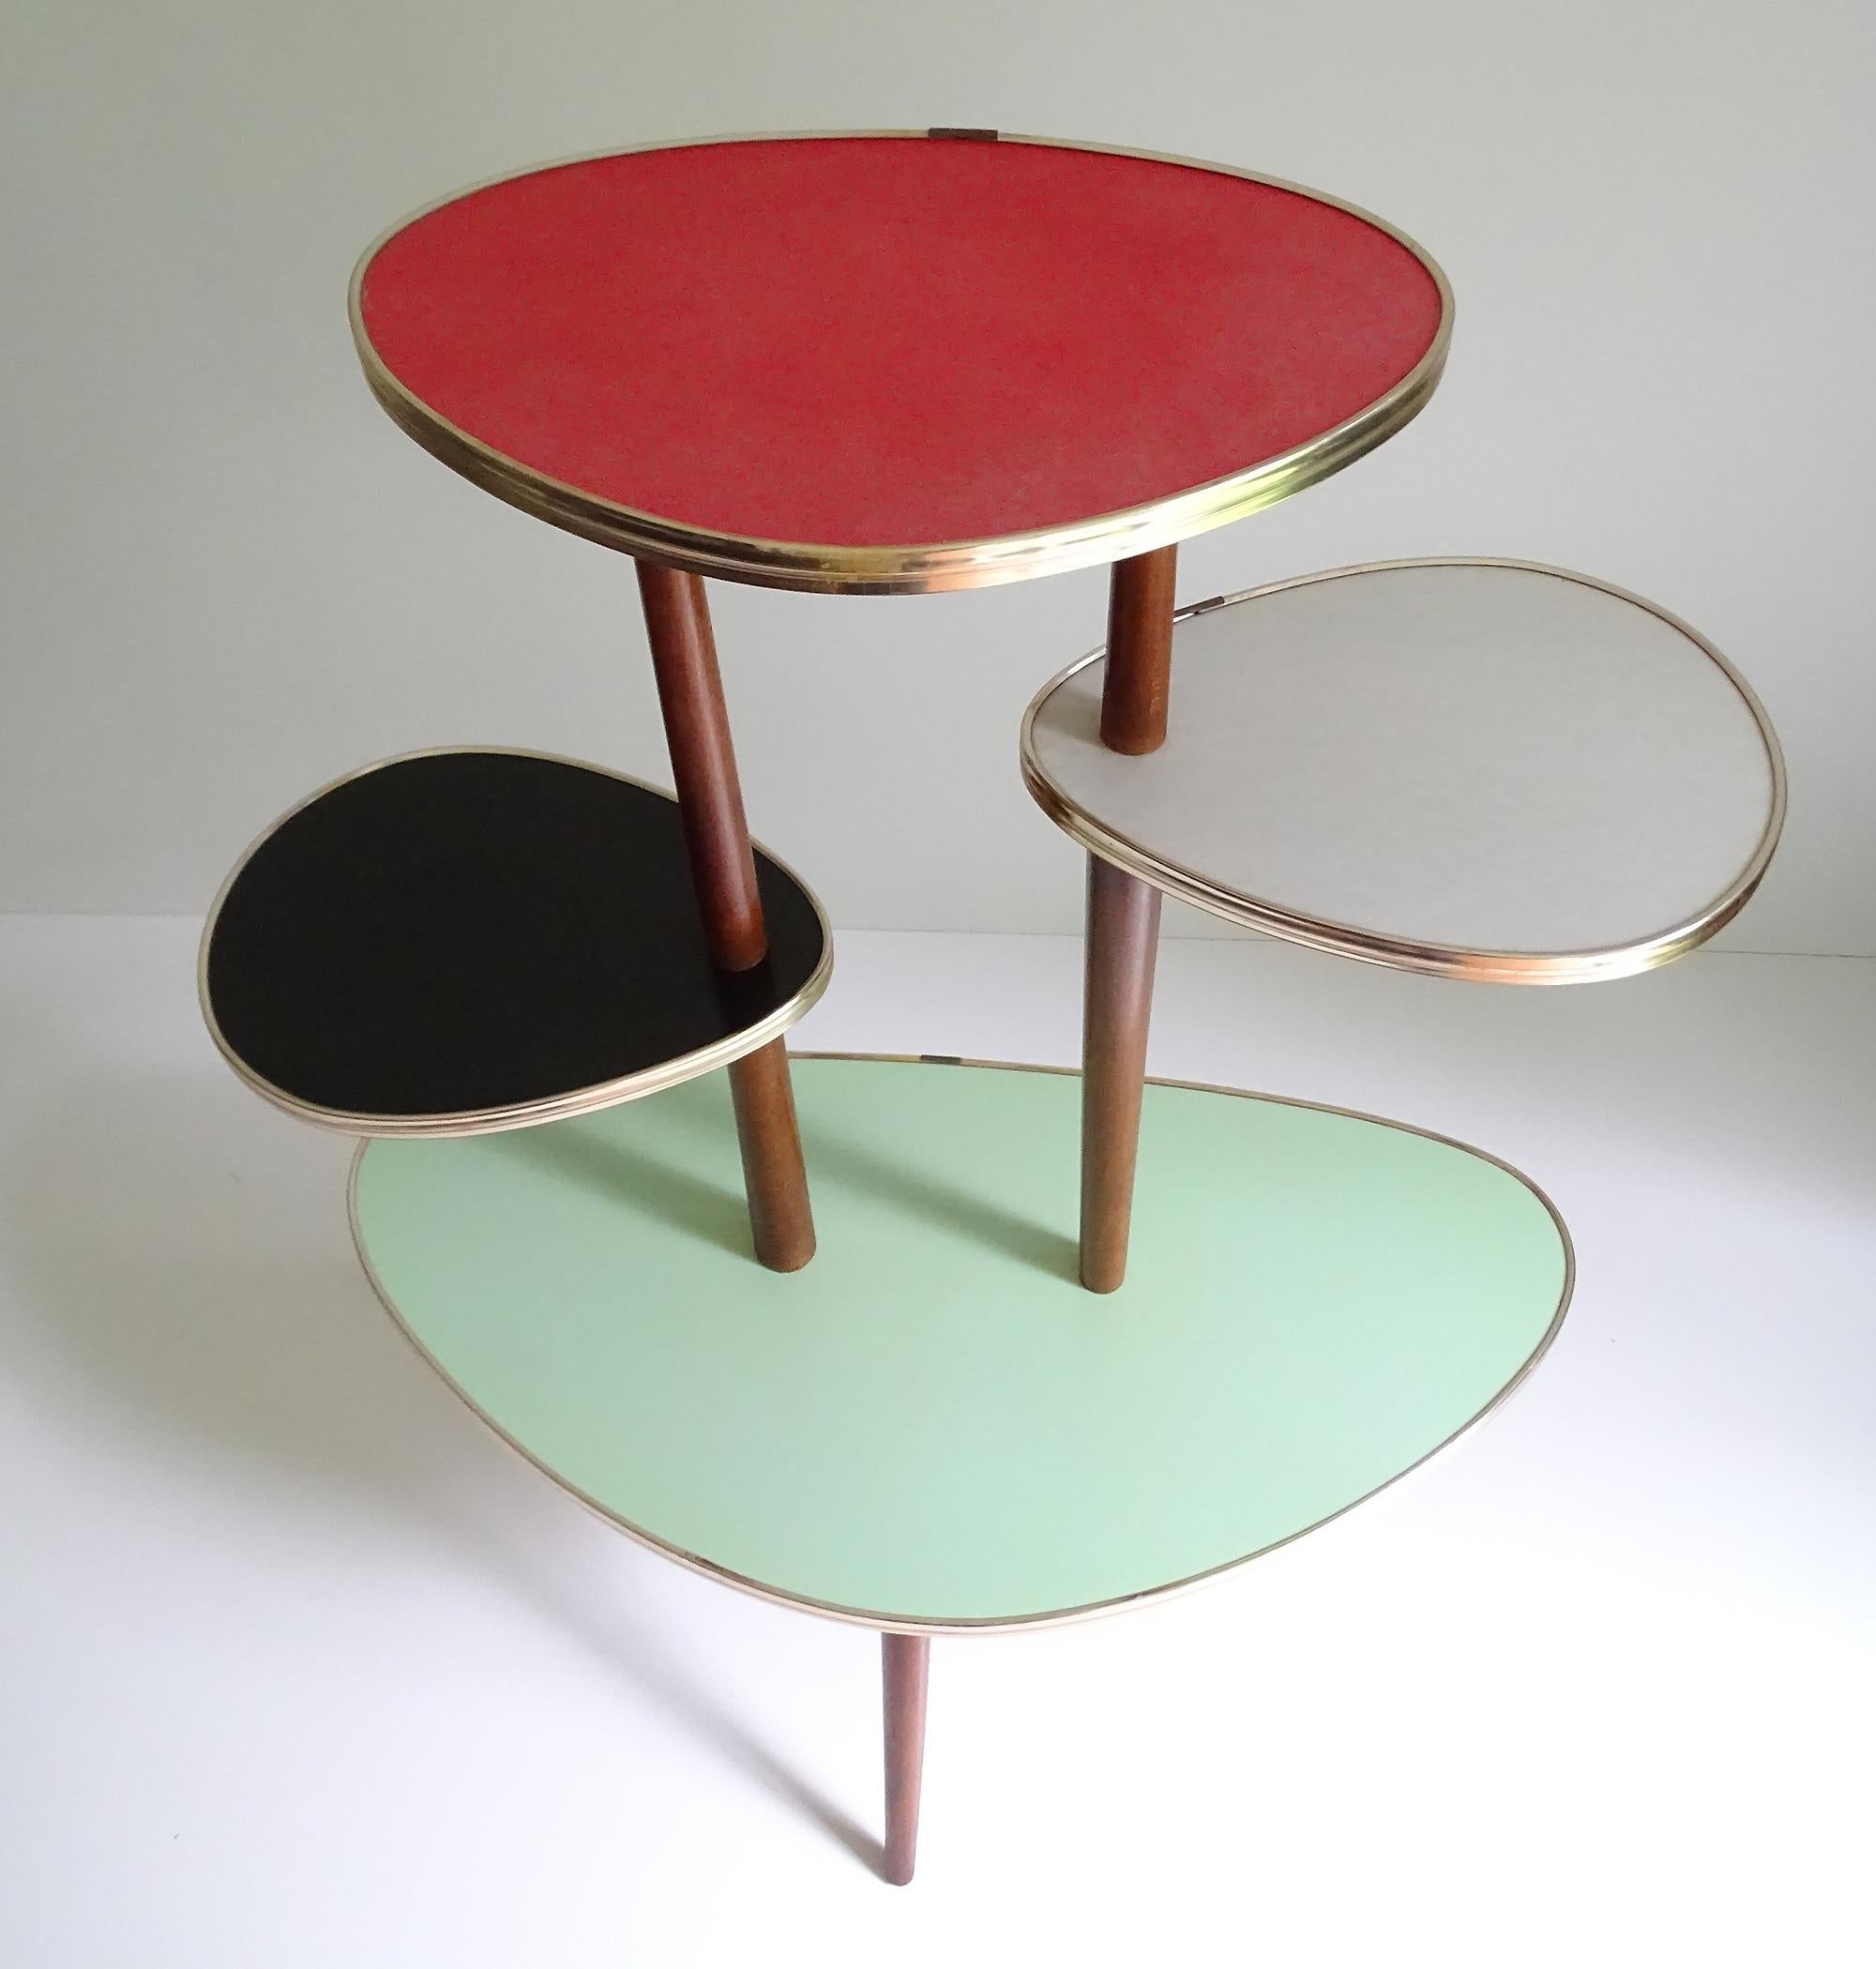 Stunning Mid-Century Modern flower / plant stand. This is an extremely rare quite large model with stunning colorful combination
It features 1 large triangular lower and 4 smaller plates, arranged in clockwise fashion on 3/4 wooden circle stand, 3